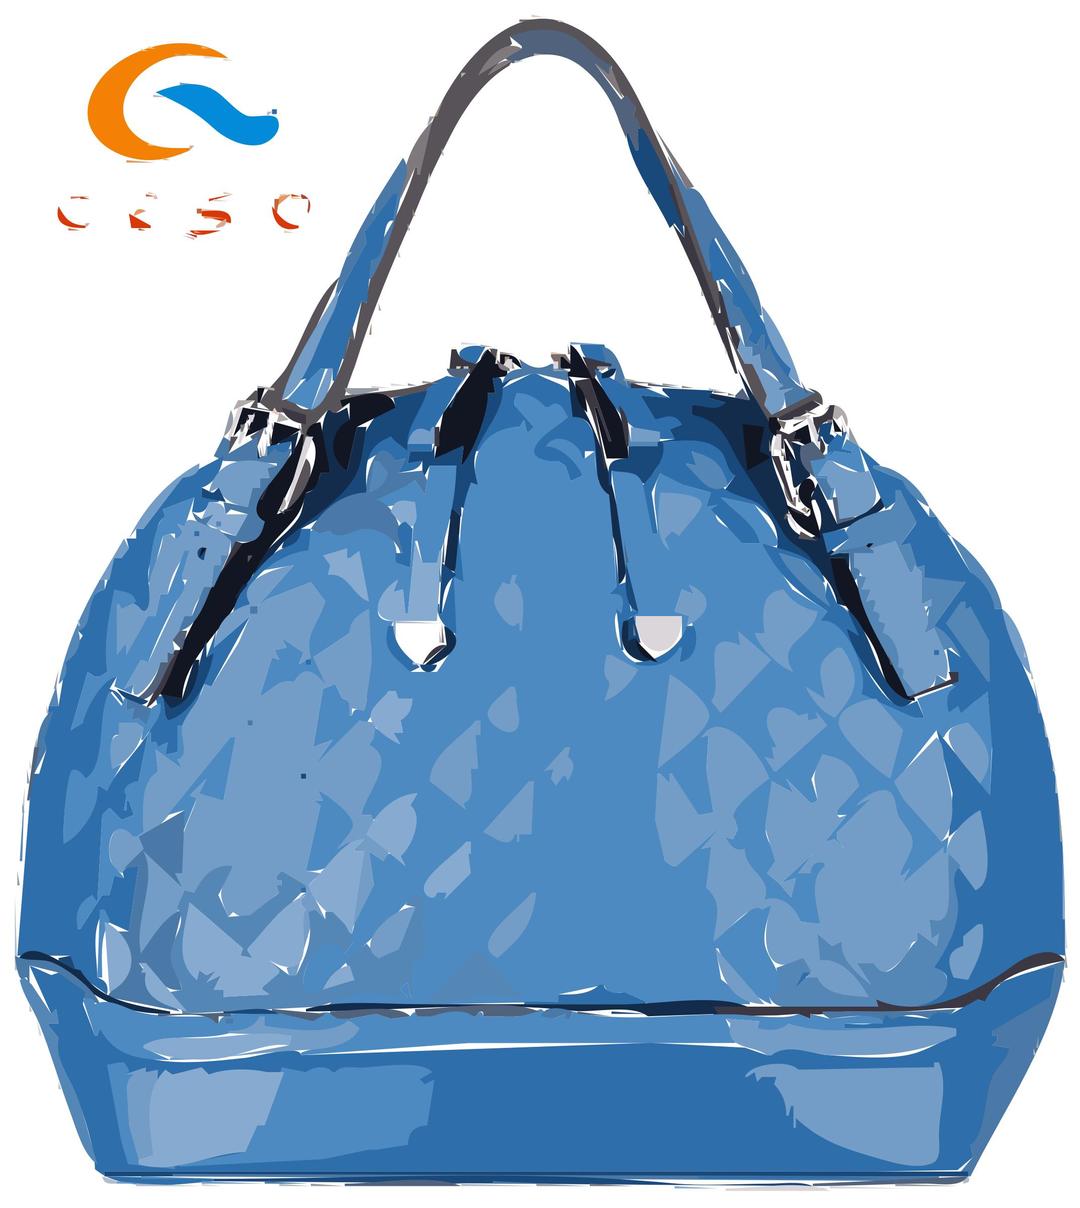 Blue Leather Bag with Logo png transparent